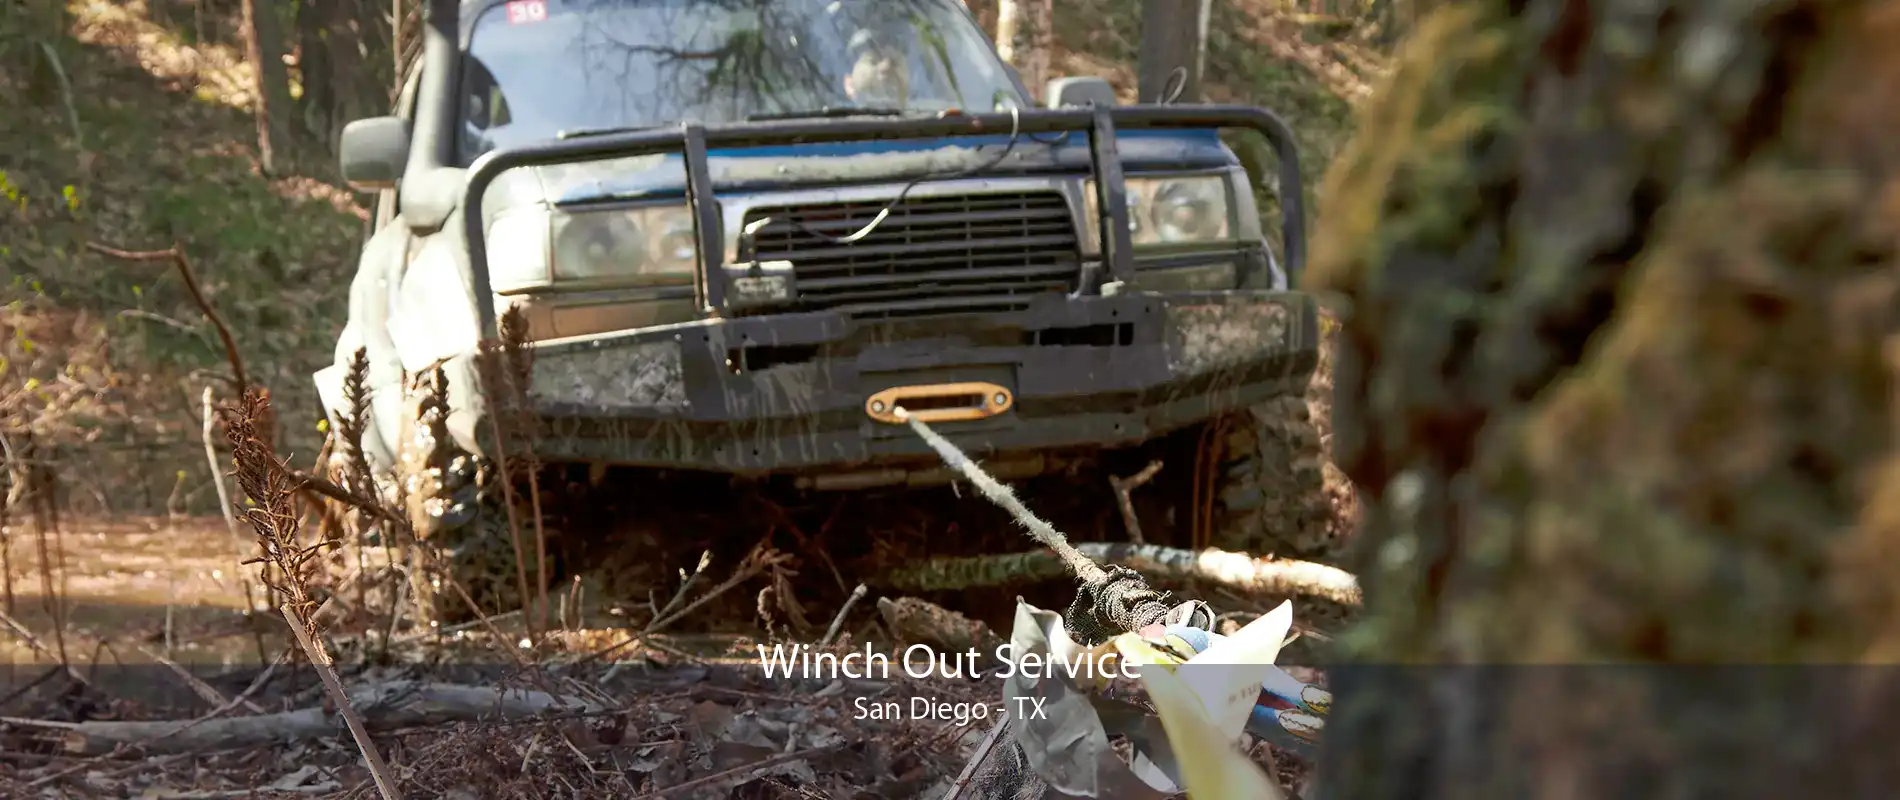 Winch Out Service San Diego - TX